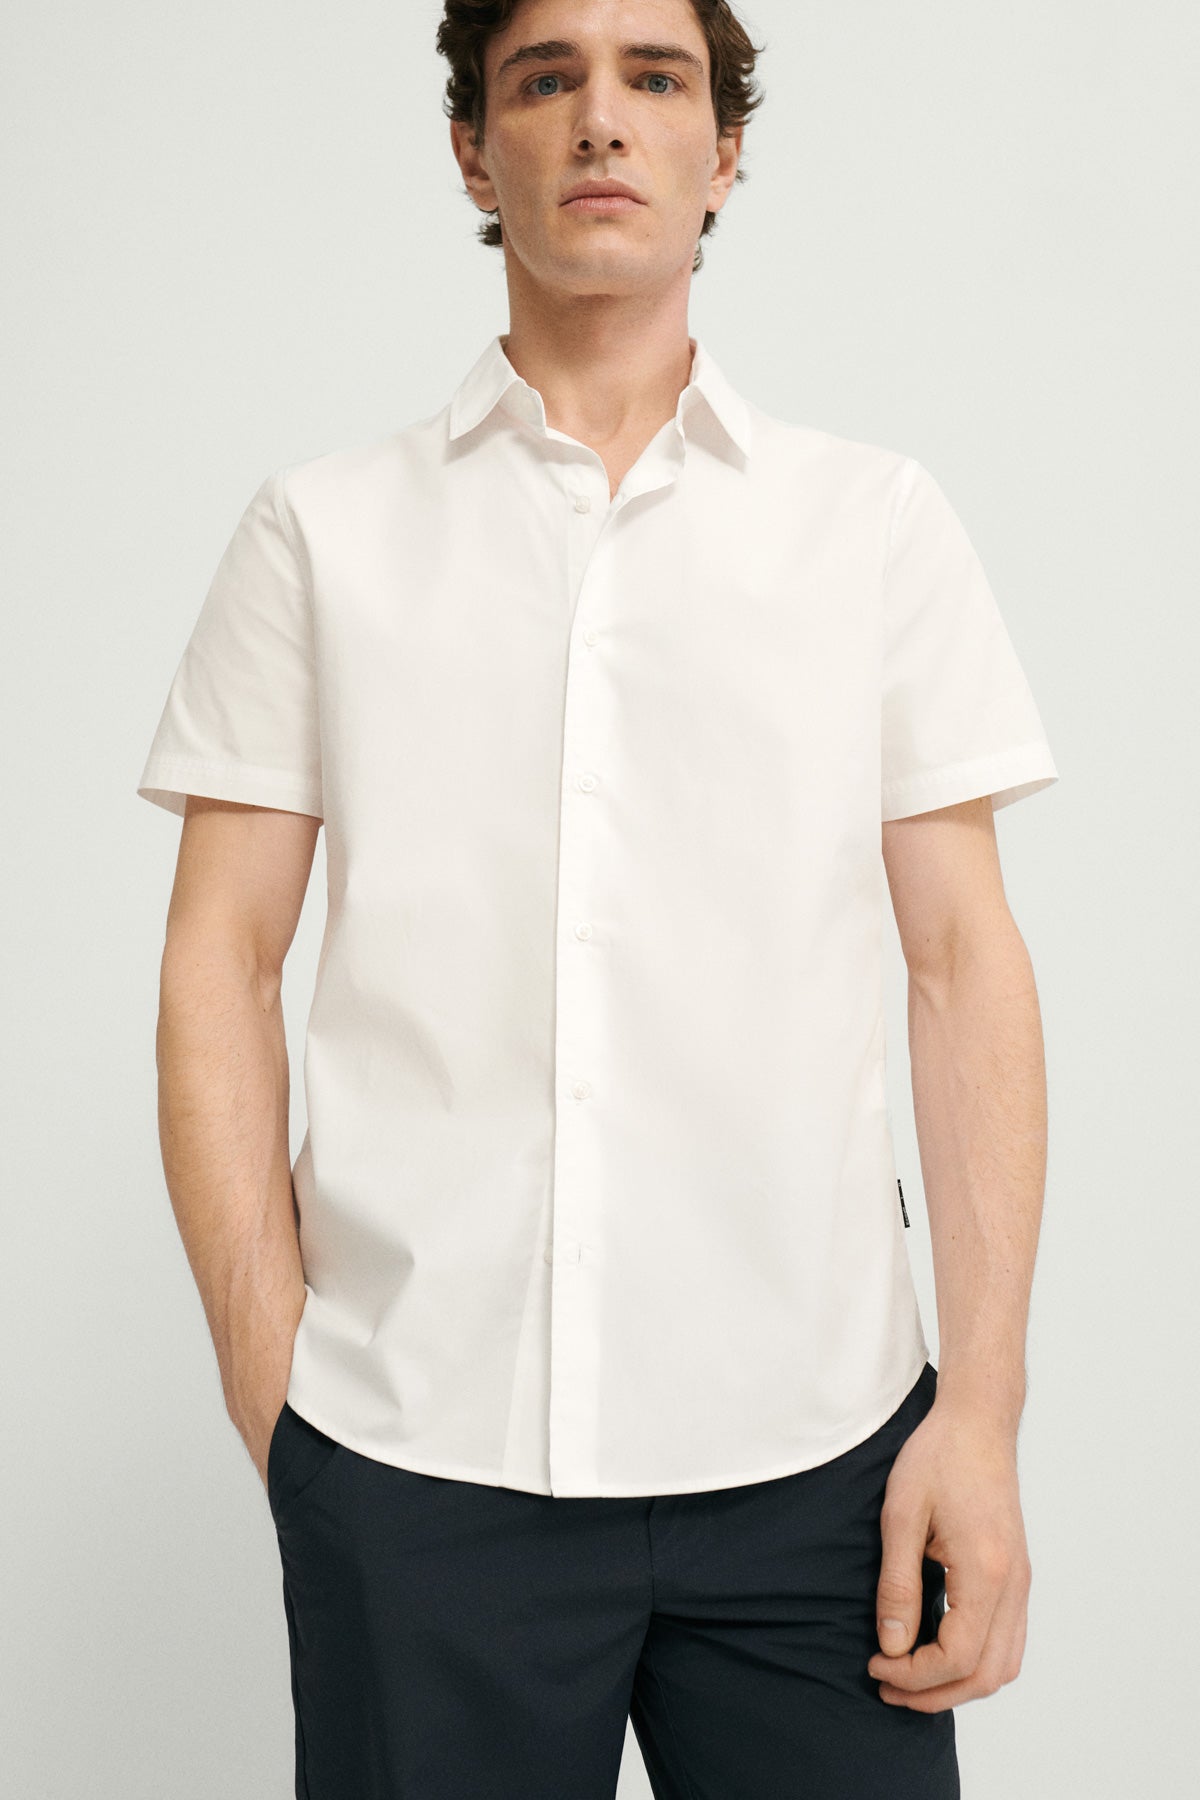 MIGUEL SHIRT WHITE